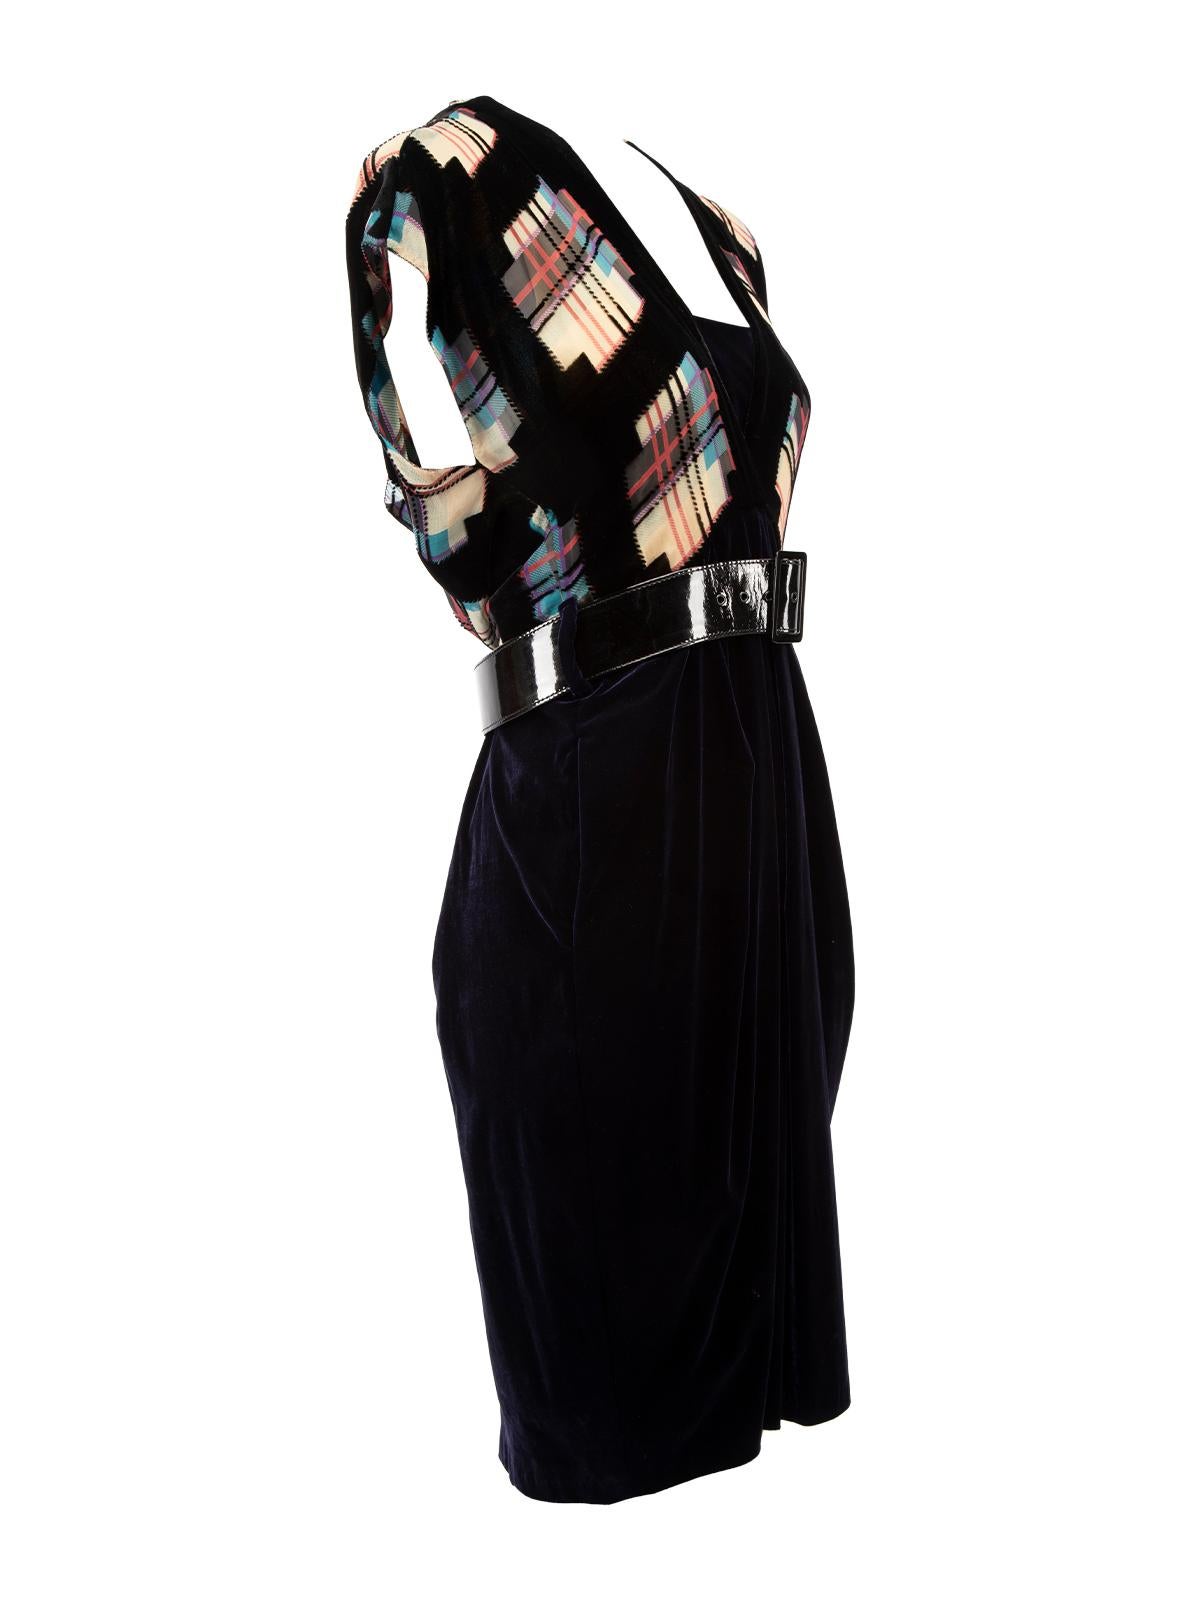 CONDITION is Good. General wear to dress is evident. Small tear can be seen where the harness attaches to the neckline and loose threads along hemline on this used Jean Paul Gautier designer resale item. Details Multicolour- Navy, black, beige and